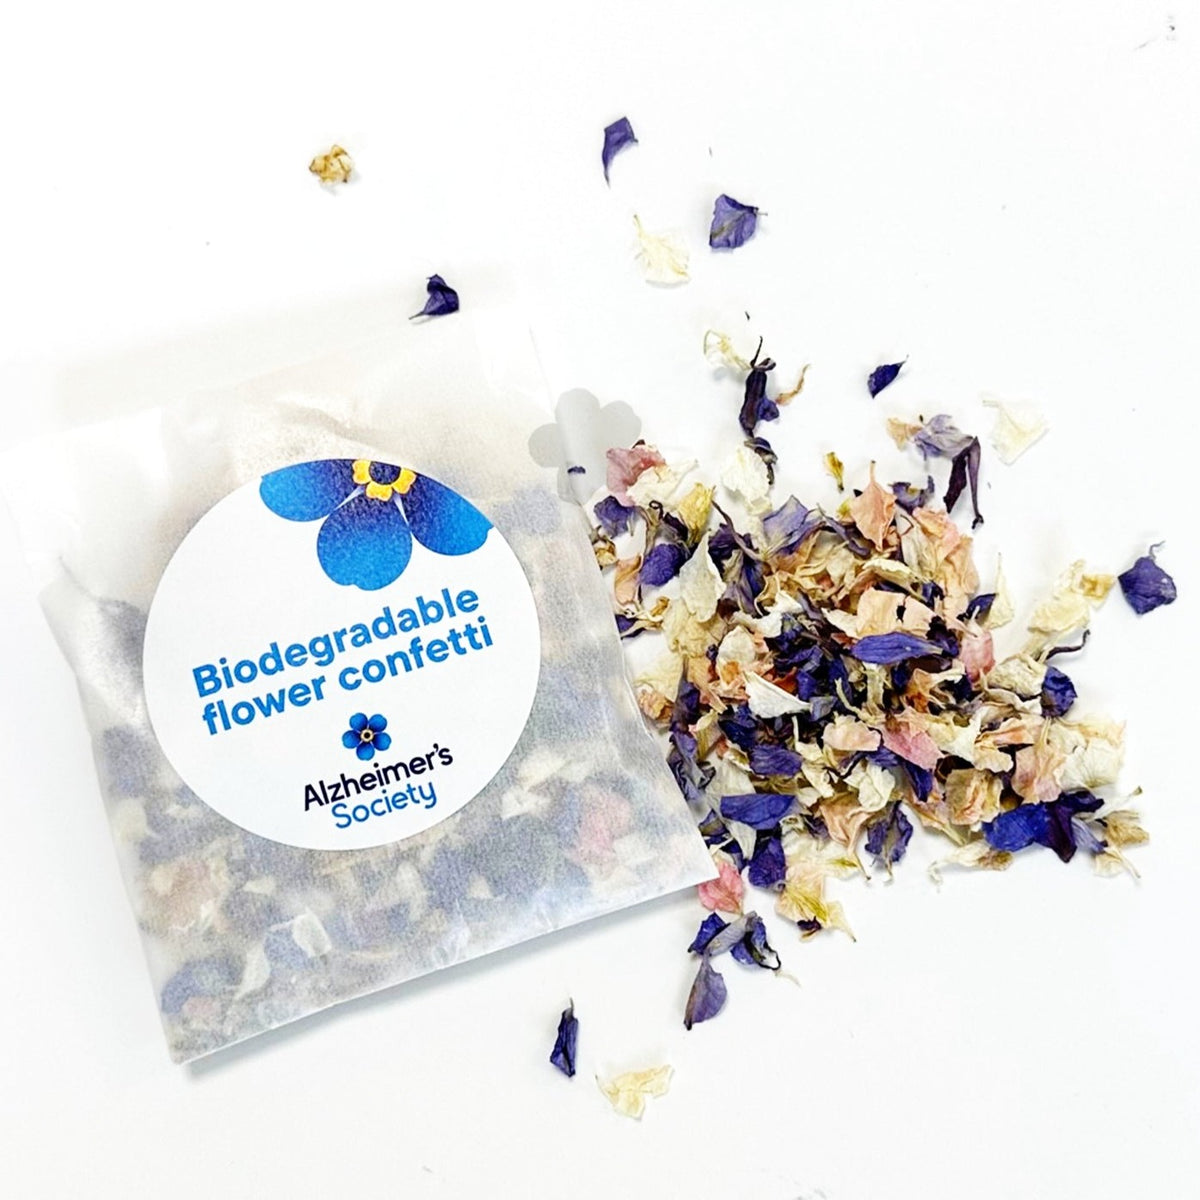 A paper bag which shows the contents of white, pink, blue dried delphinium flower confetti. A sticker on the bag says biodegradable flower confetti and has the Alzheimer&#39;s Society logo too.